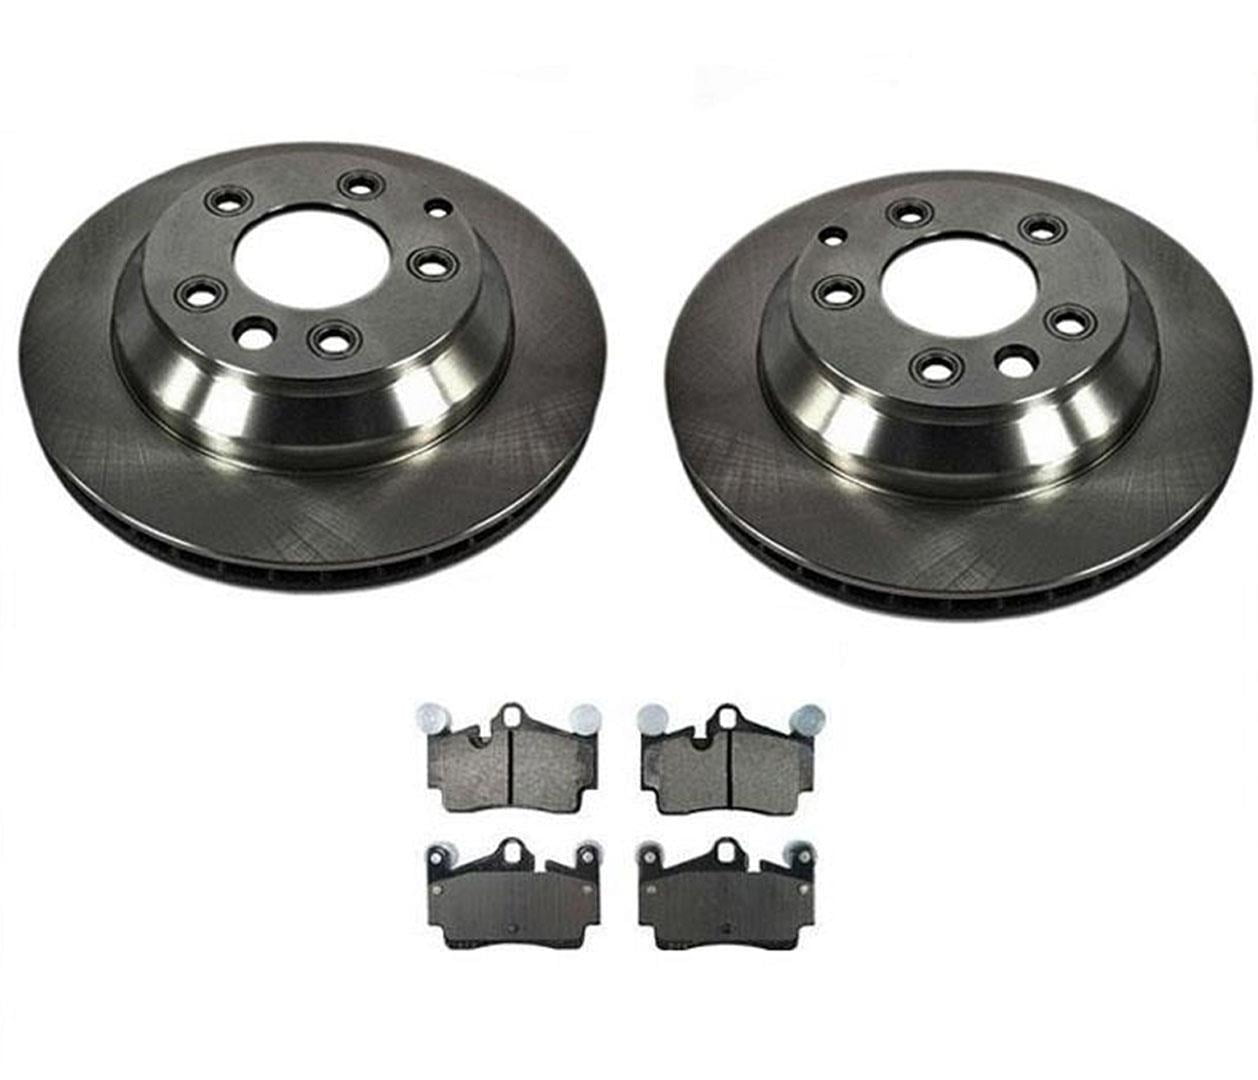 Rear Hart Brakes Ceramic Series Brake Pad With Rubber Steel Rubber Shims